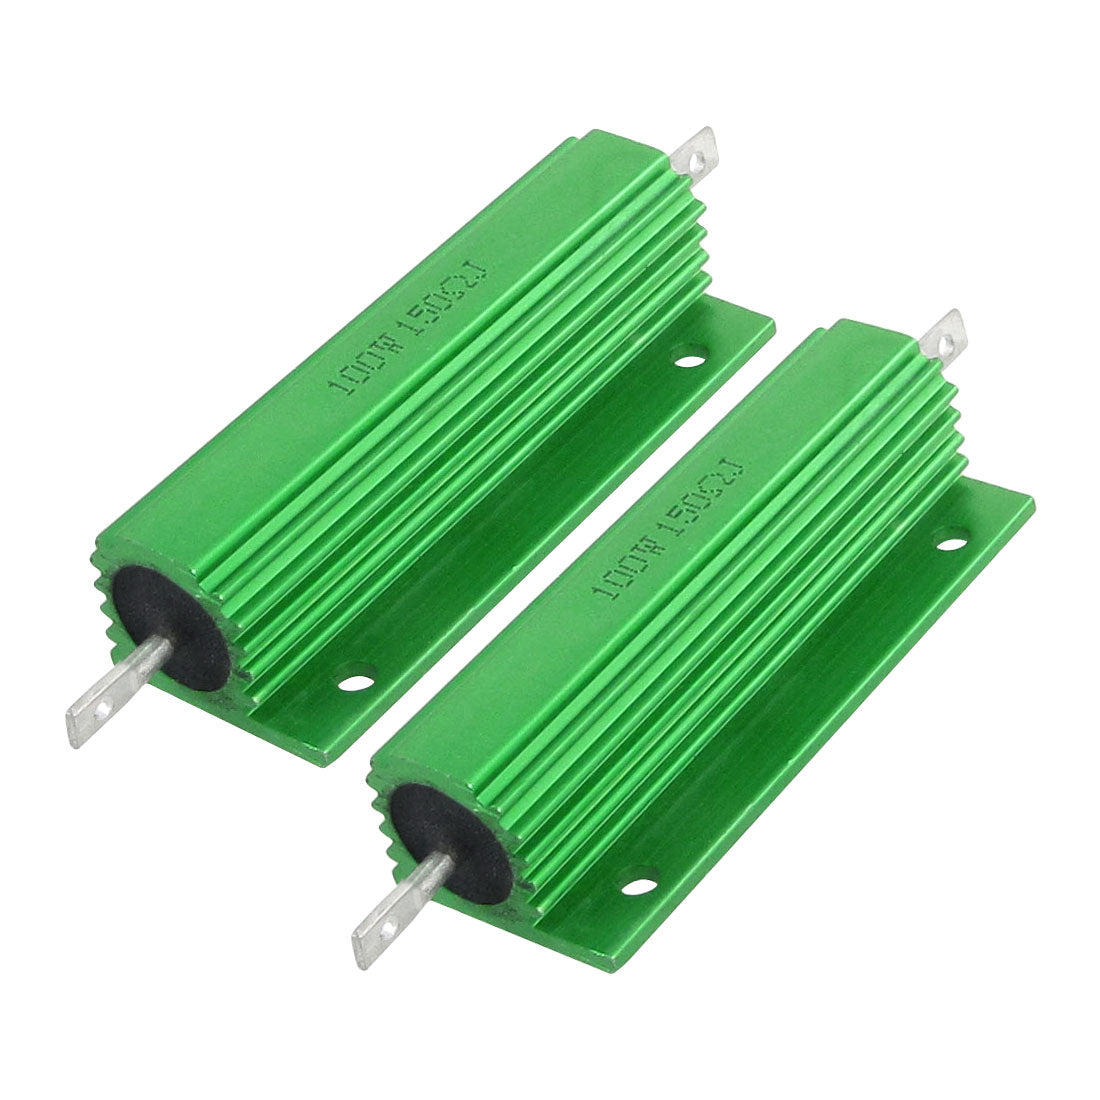 uxcell Uxcell 2 Pcs Green Aluminum Housed 100W Power Rating 5% 150 Ohm Resistors Resistance